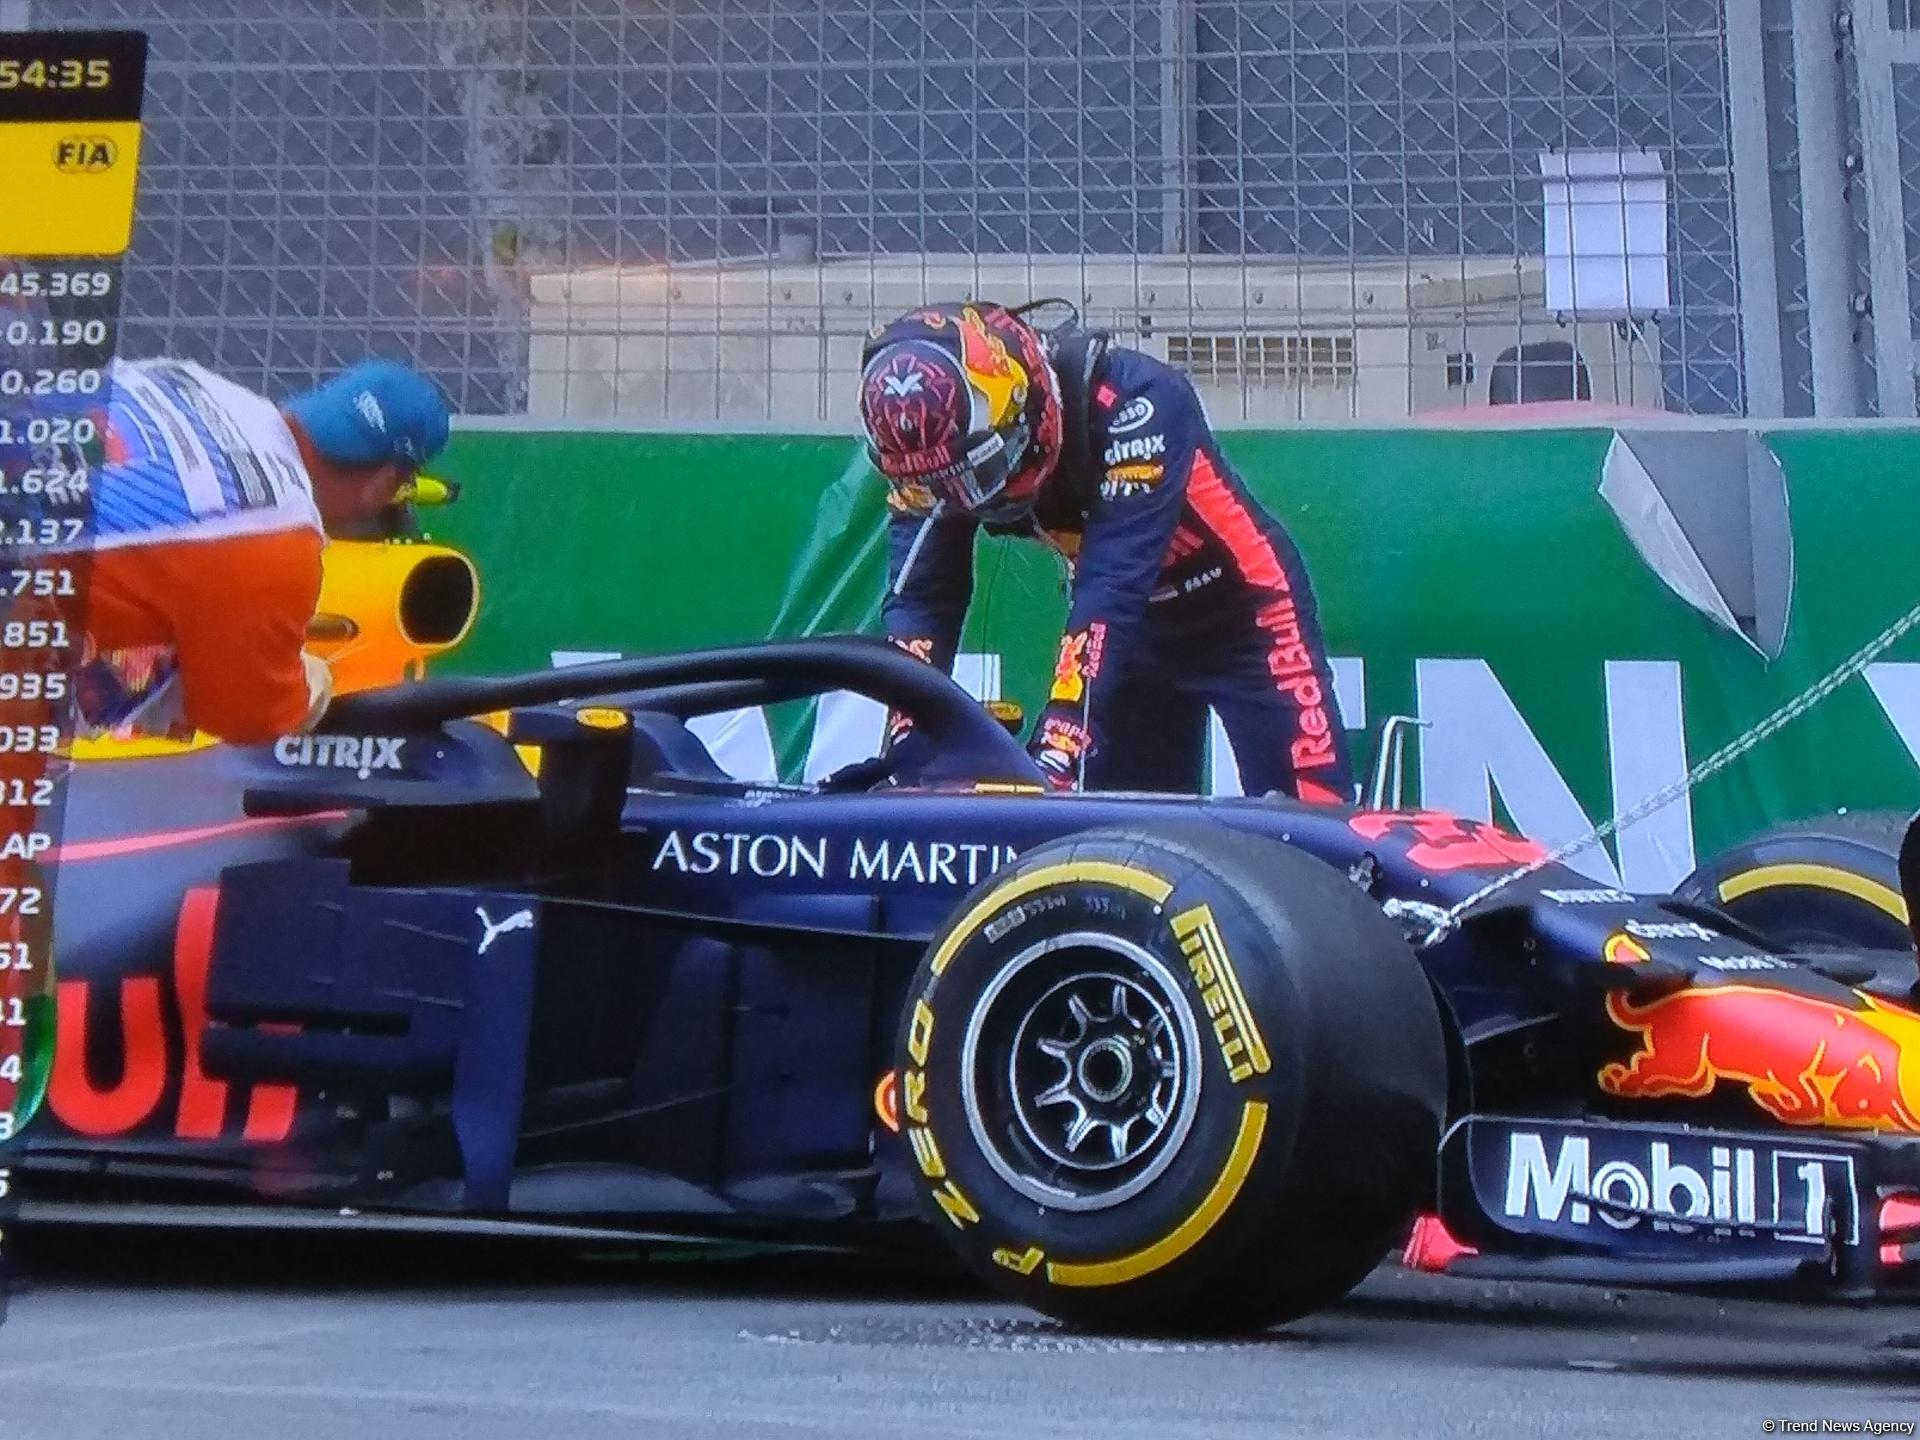 Red Bull Racing pilot crashes into wall during practice session in Baku (PHOTO)